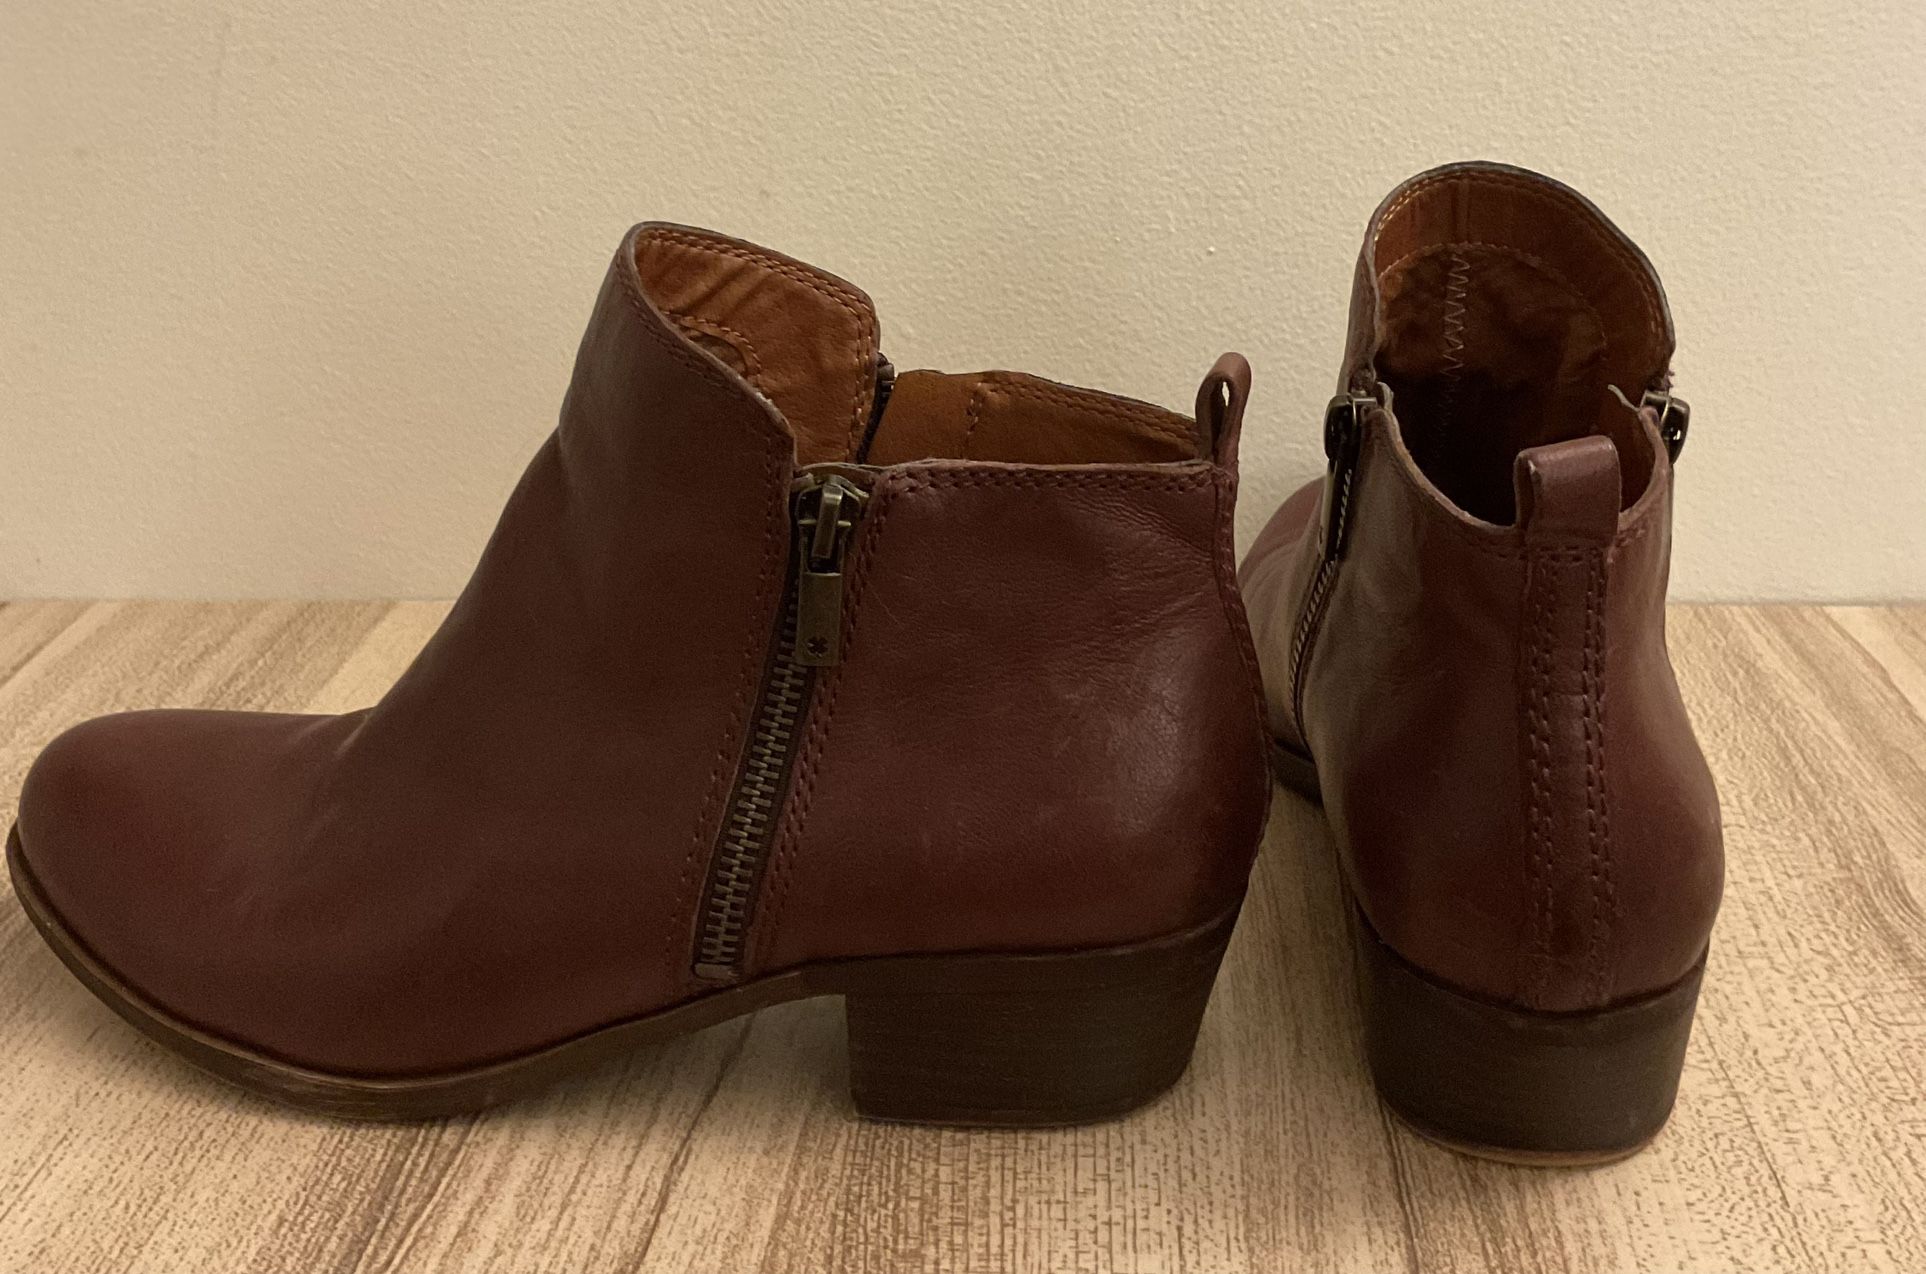 Lucky Brand Women's Basel Ankle Bootie Size 8 M